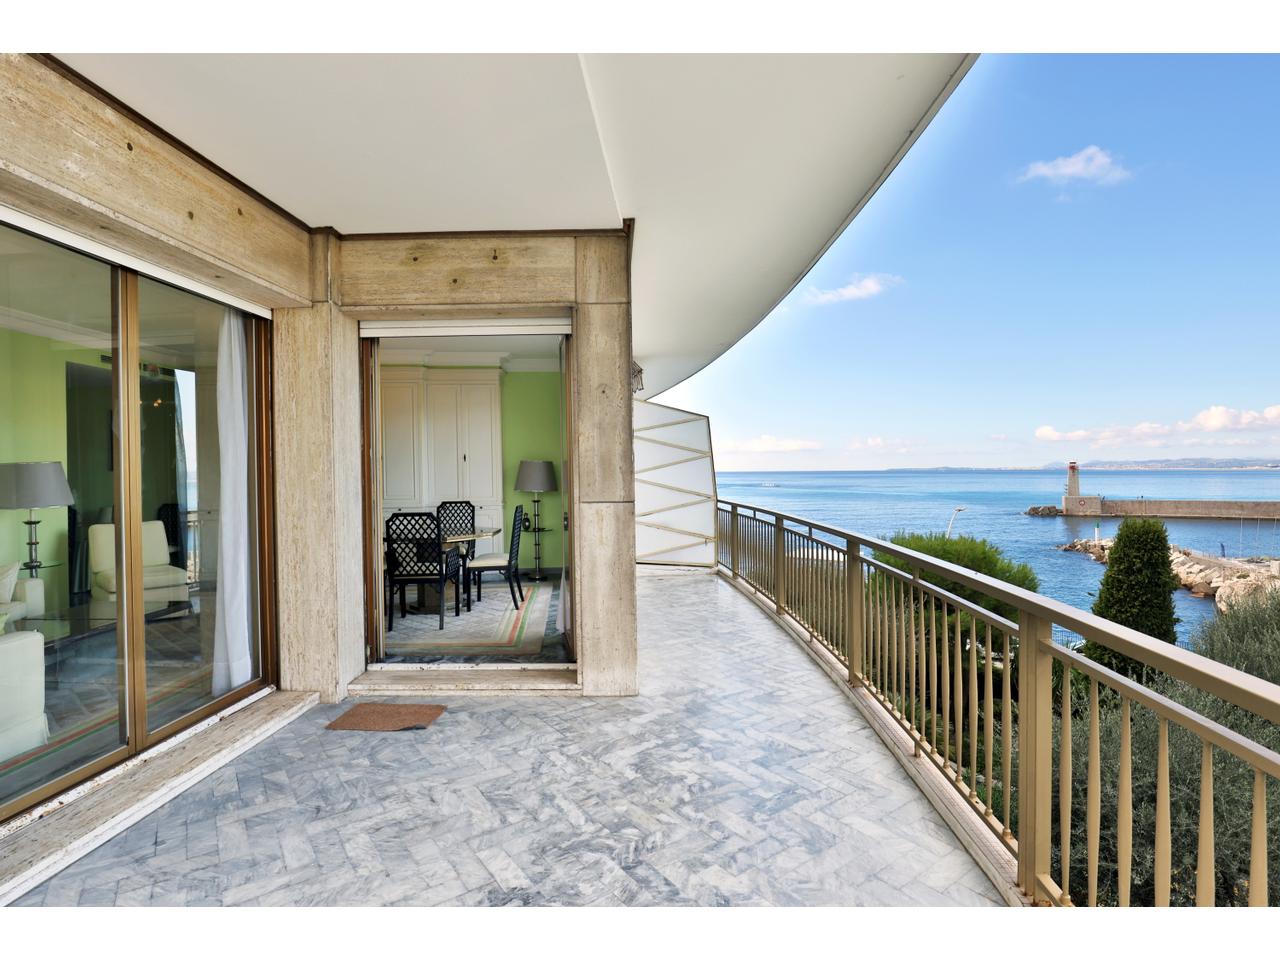 Nice Riviera - Agence Immobiliére Nice Côte d'Azur | Appartement  3 Rooms 94.16m2  for sale  1 500 000 €